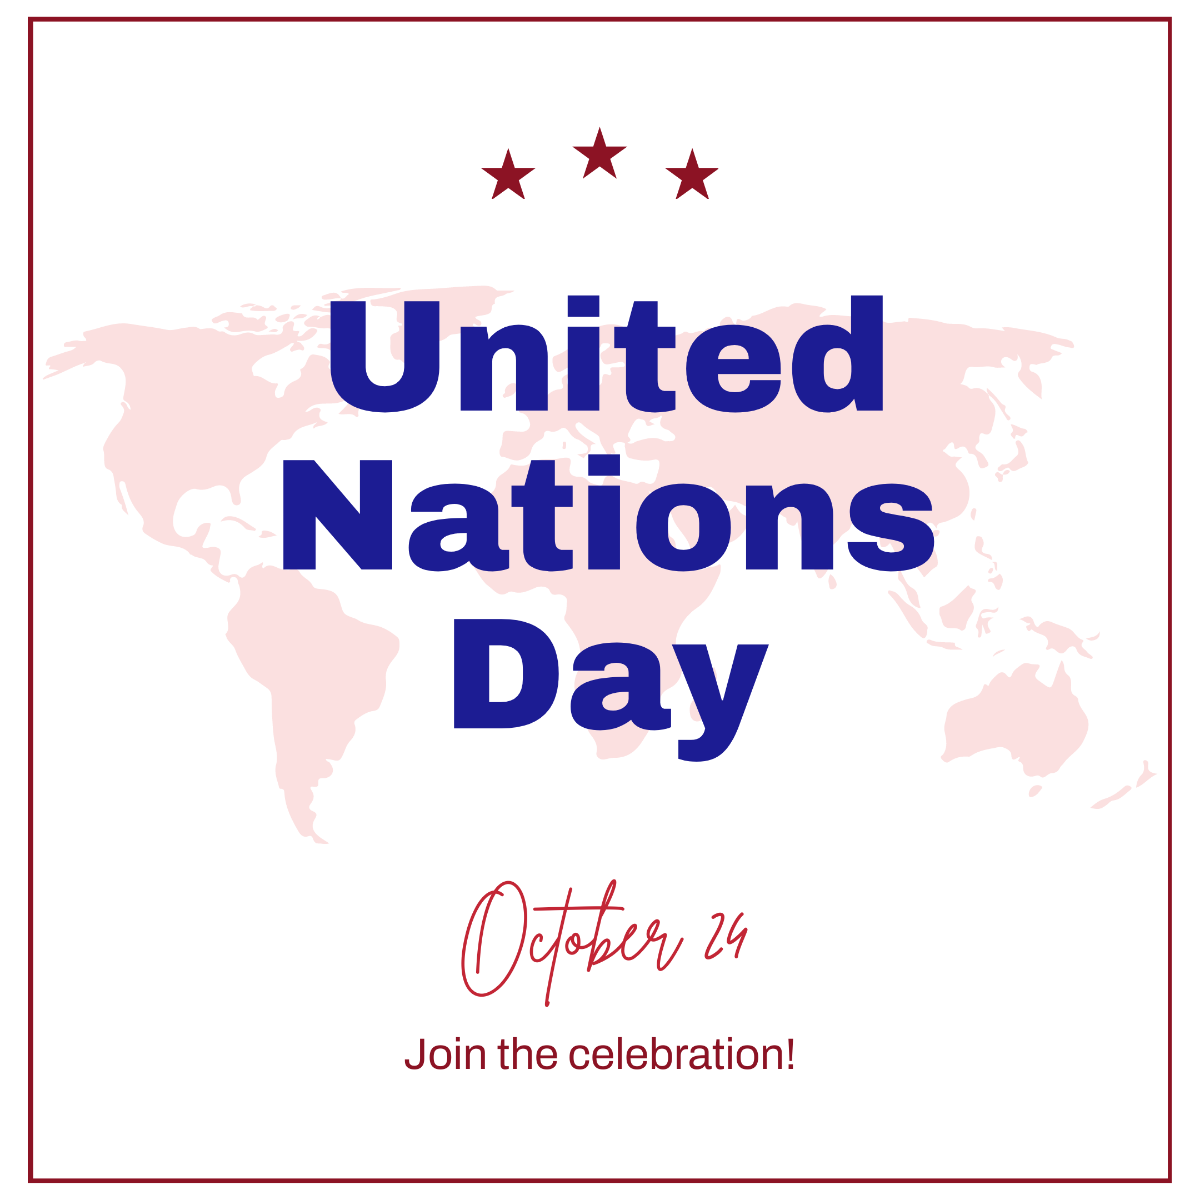 United Nations Day FB Post Template